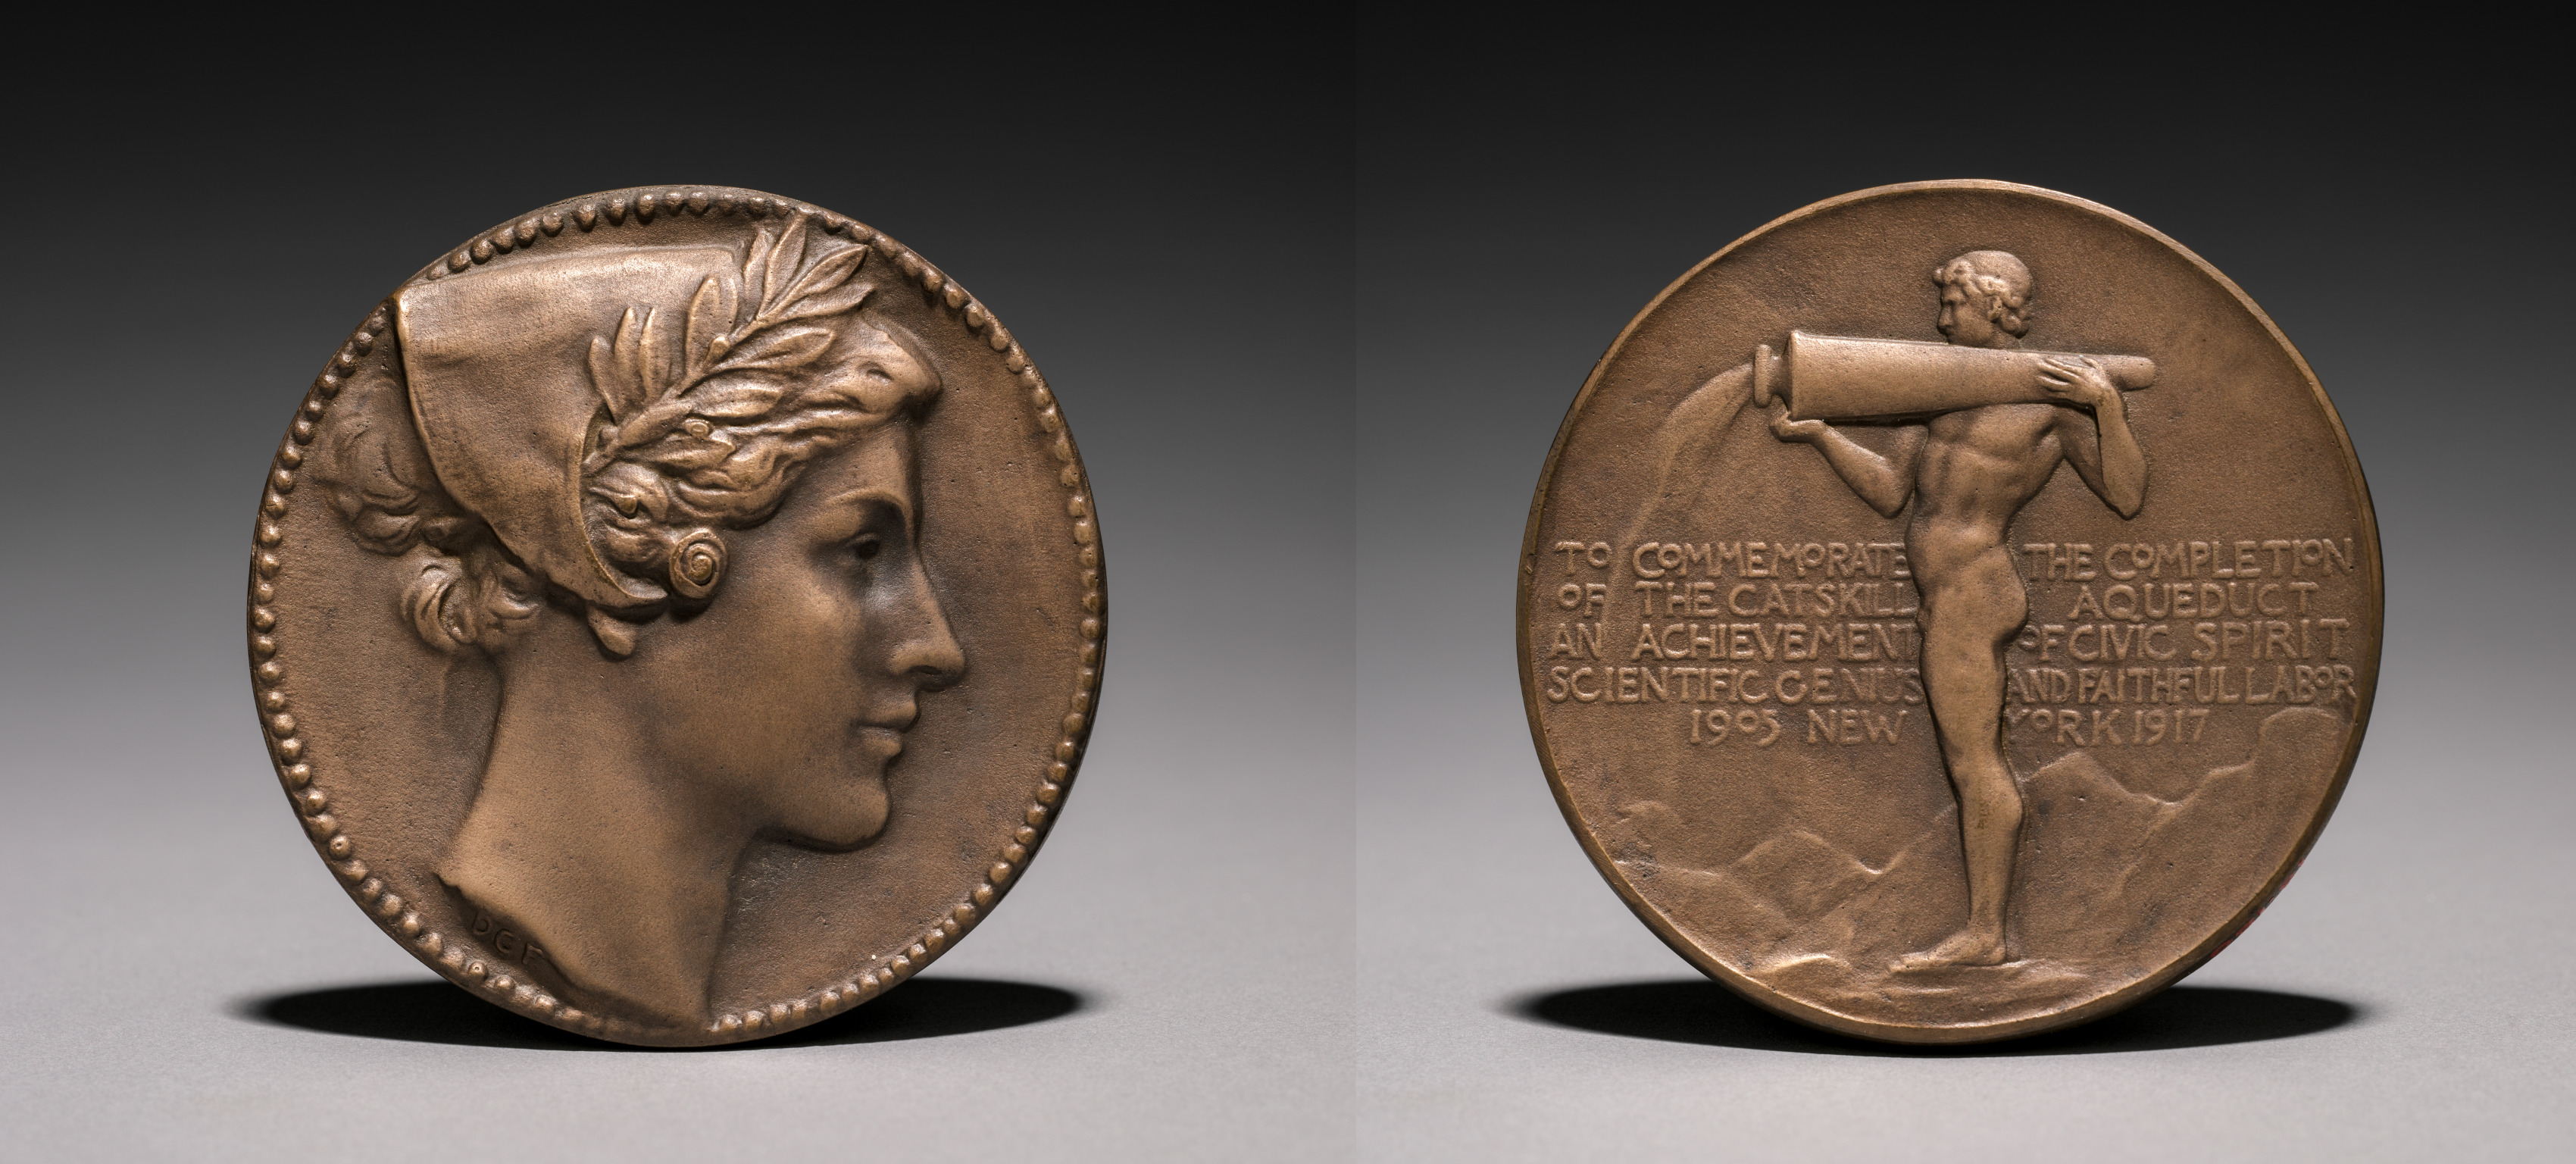 Medal Commemorating the Completion of Catskill Aqueduct